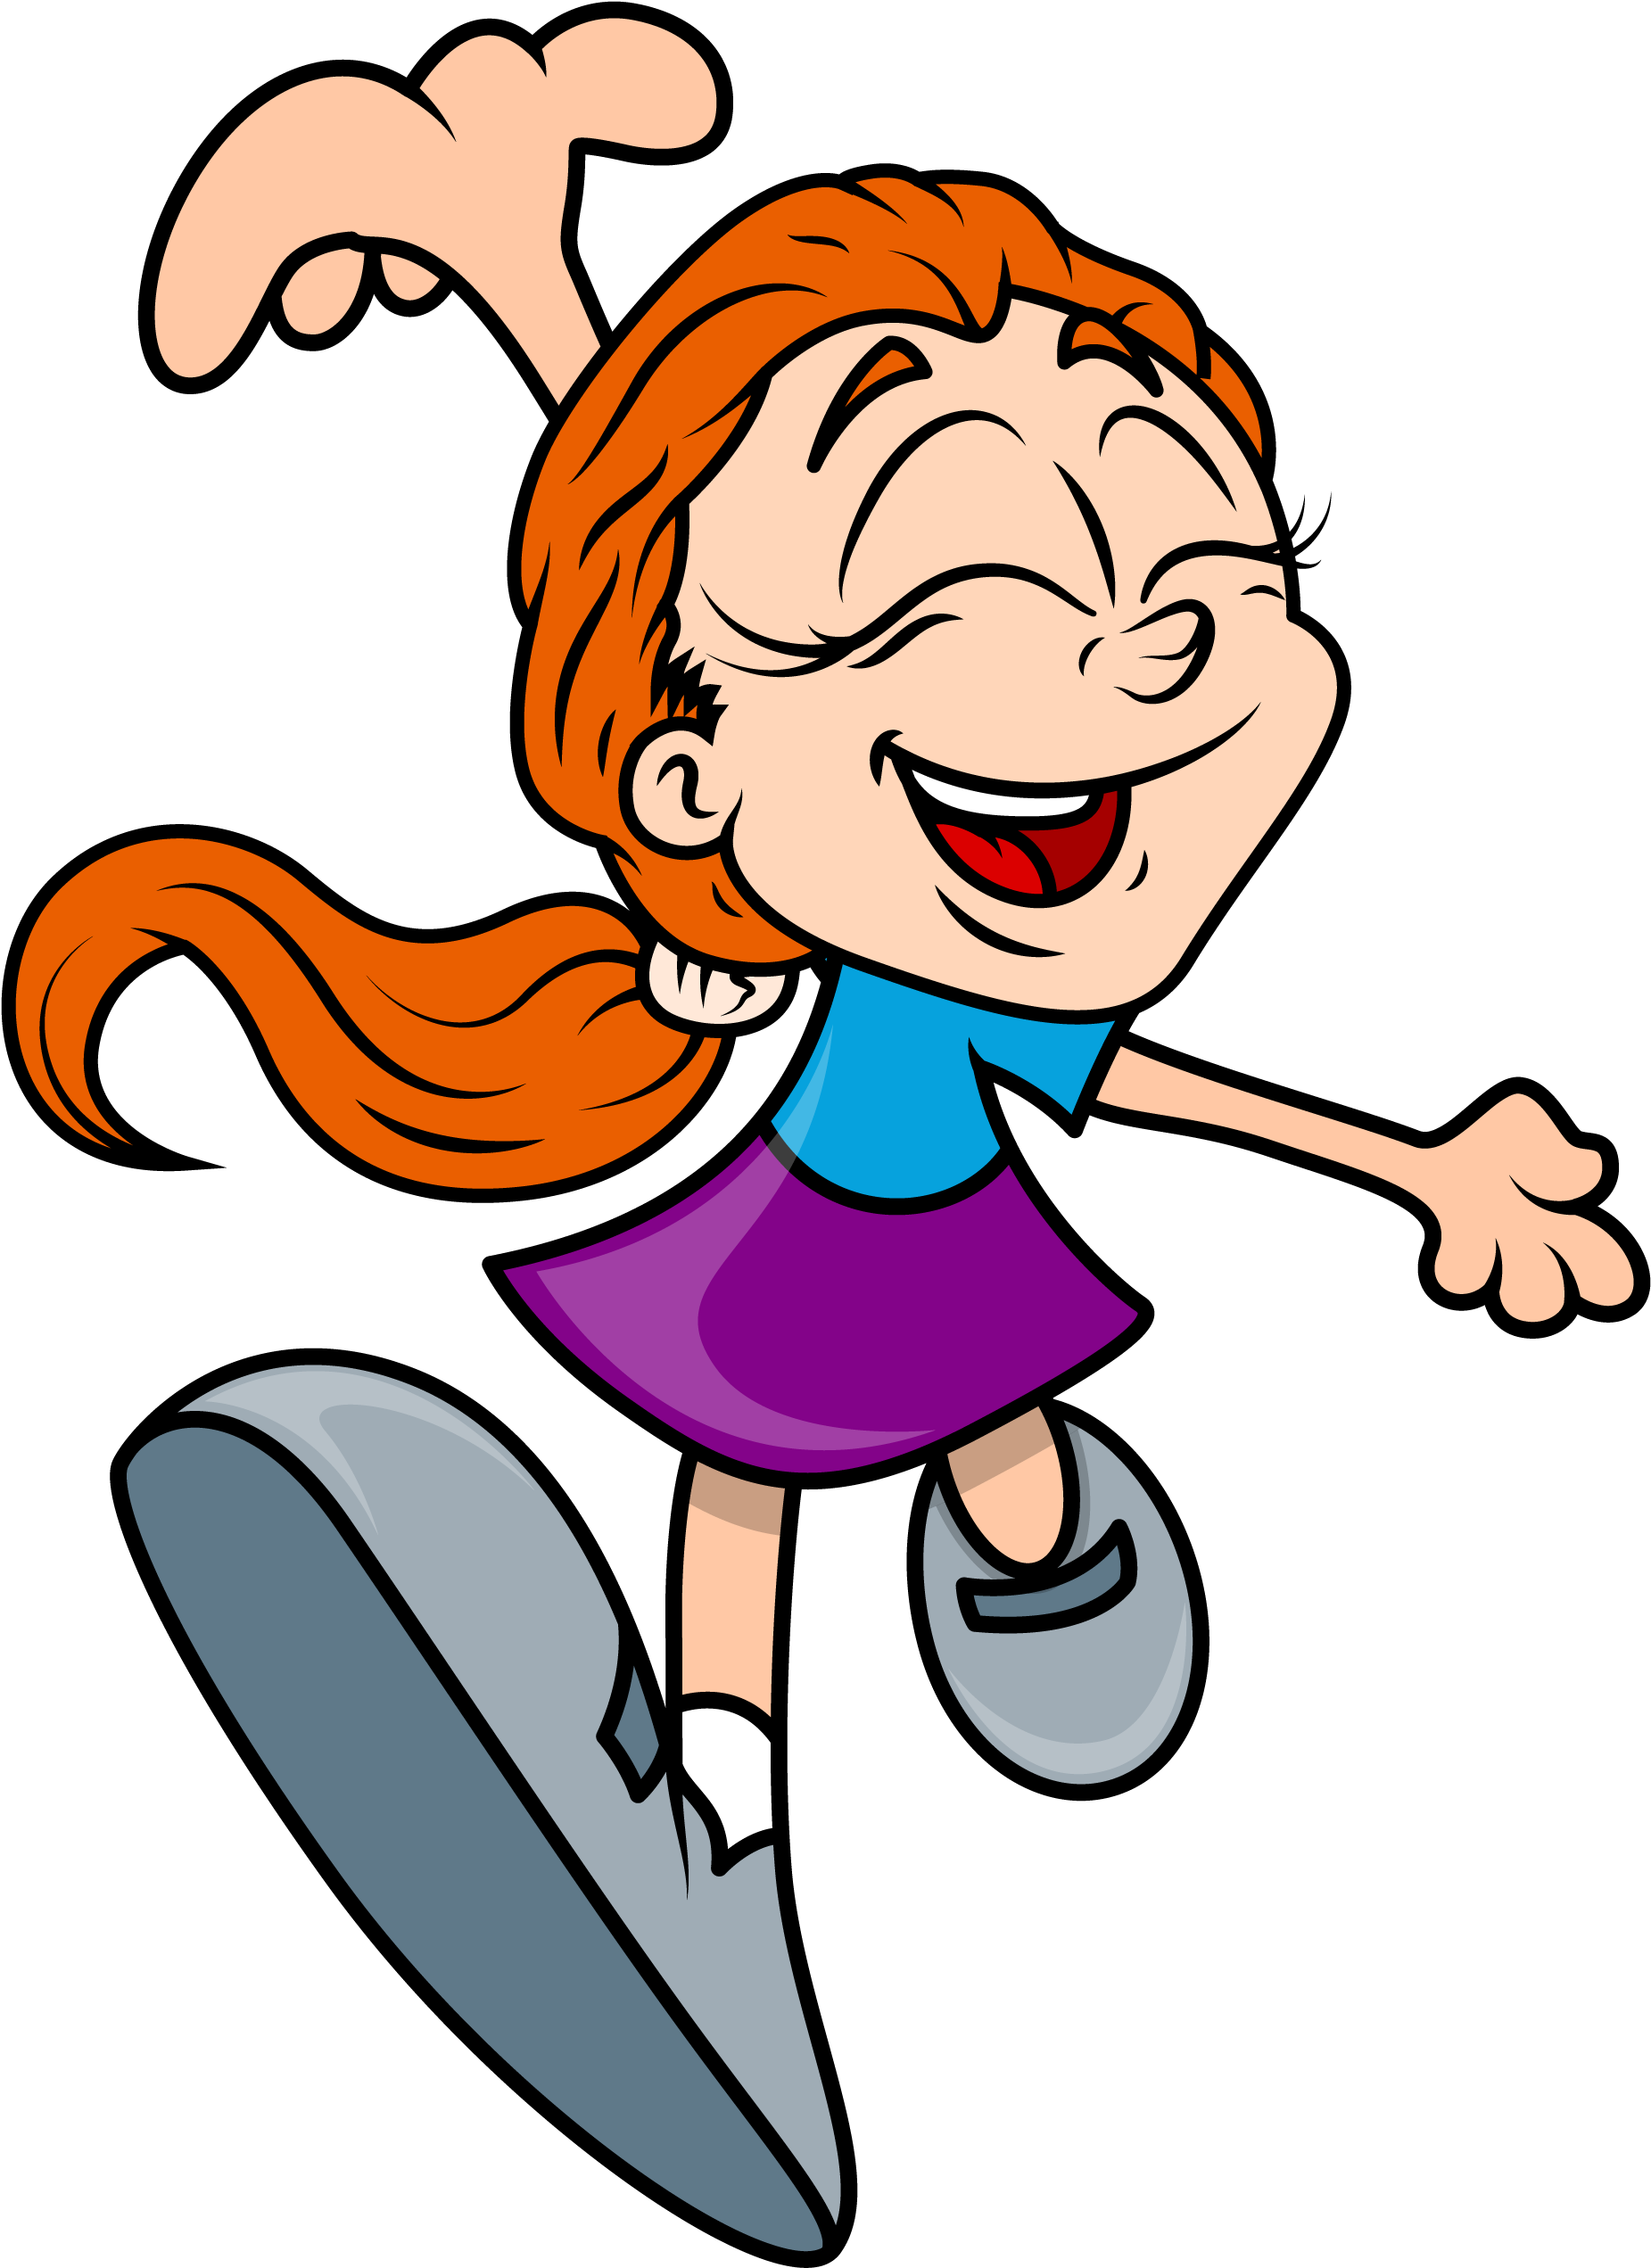 Download and share clipart about Cartoon Dance Photography Clip Art - Cheer...